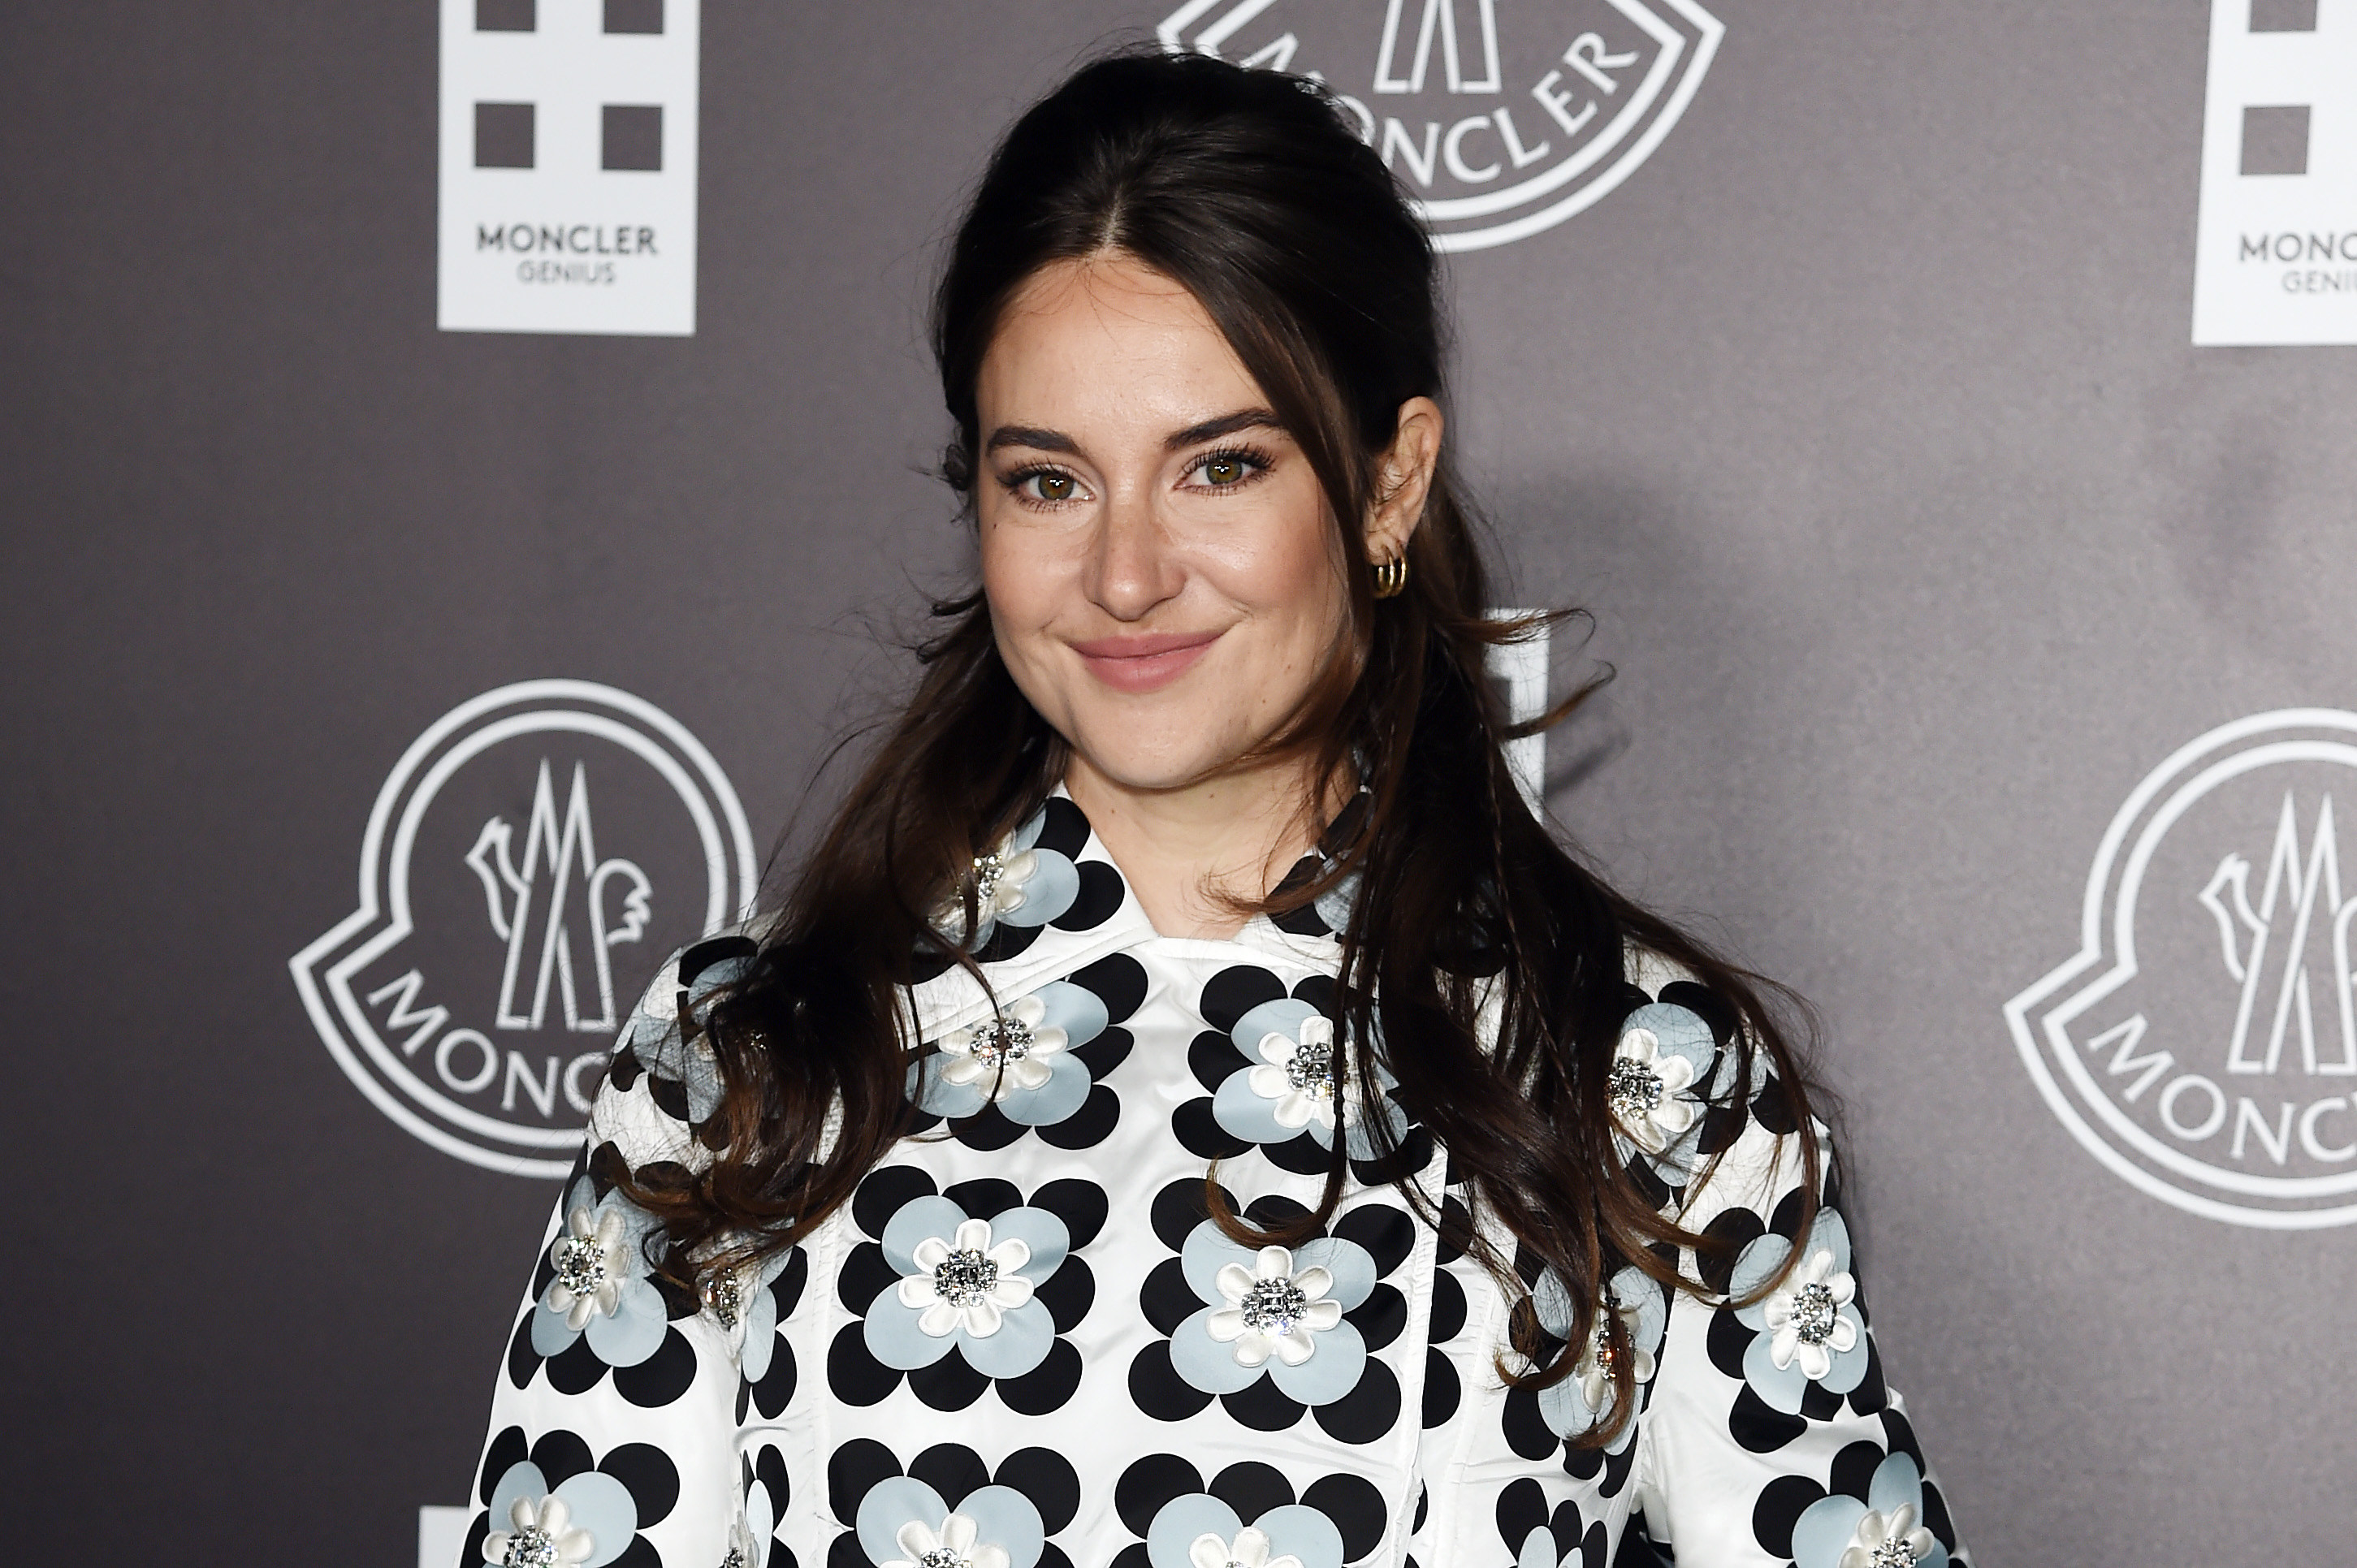 Shailene Woodley is photographed at a fashion show in Milan, Italy